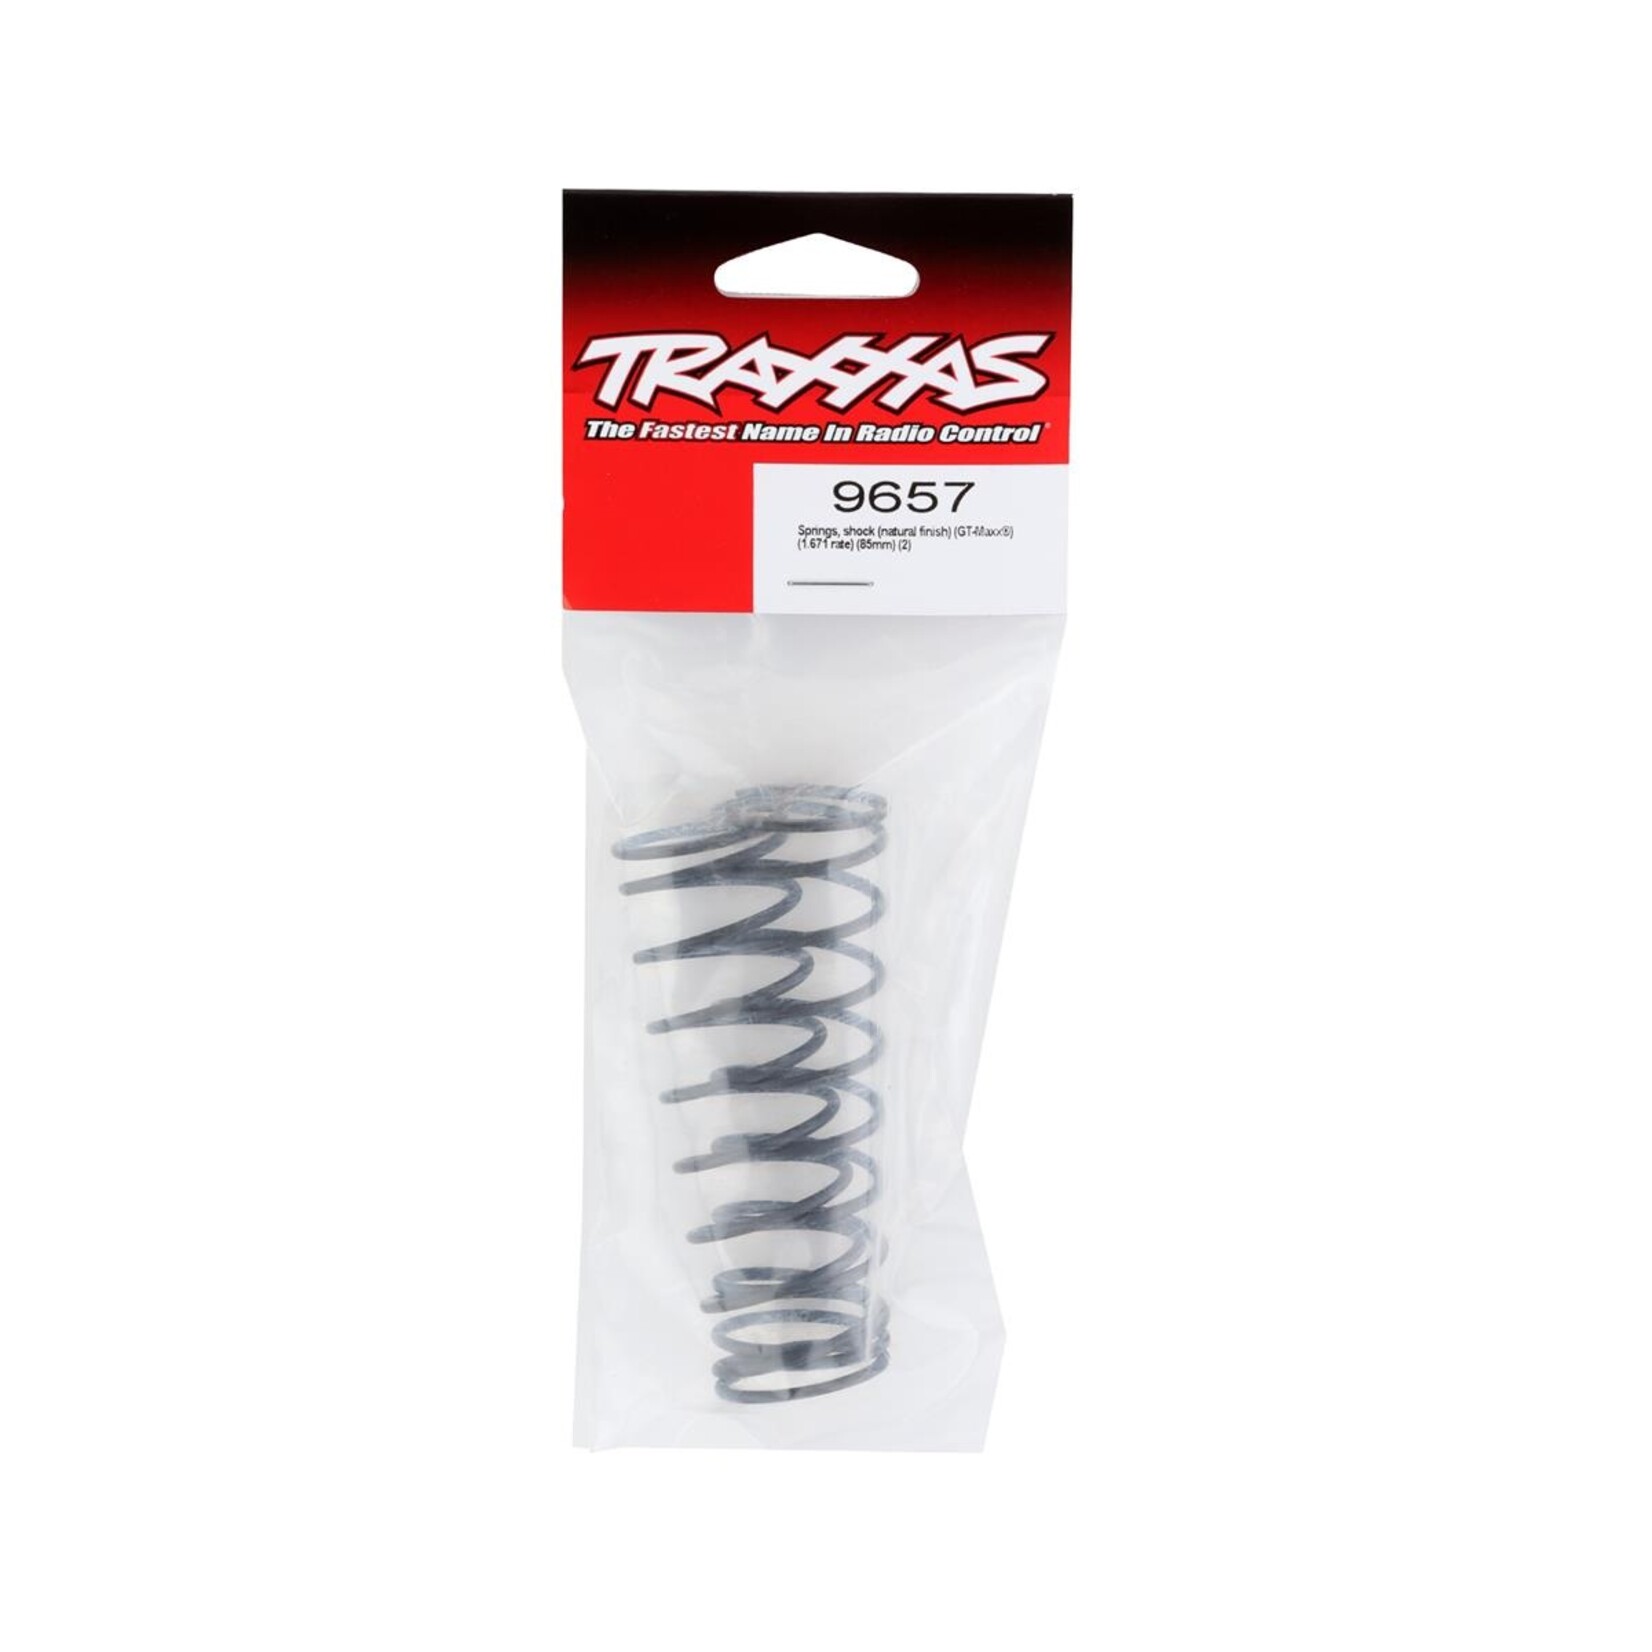 Traxxas Traxxas springs, shock (natural finish) (GT-Maxx®) (1.671 rate) (85mm) (2) #9657